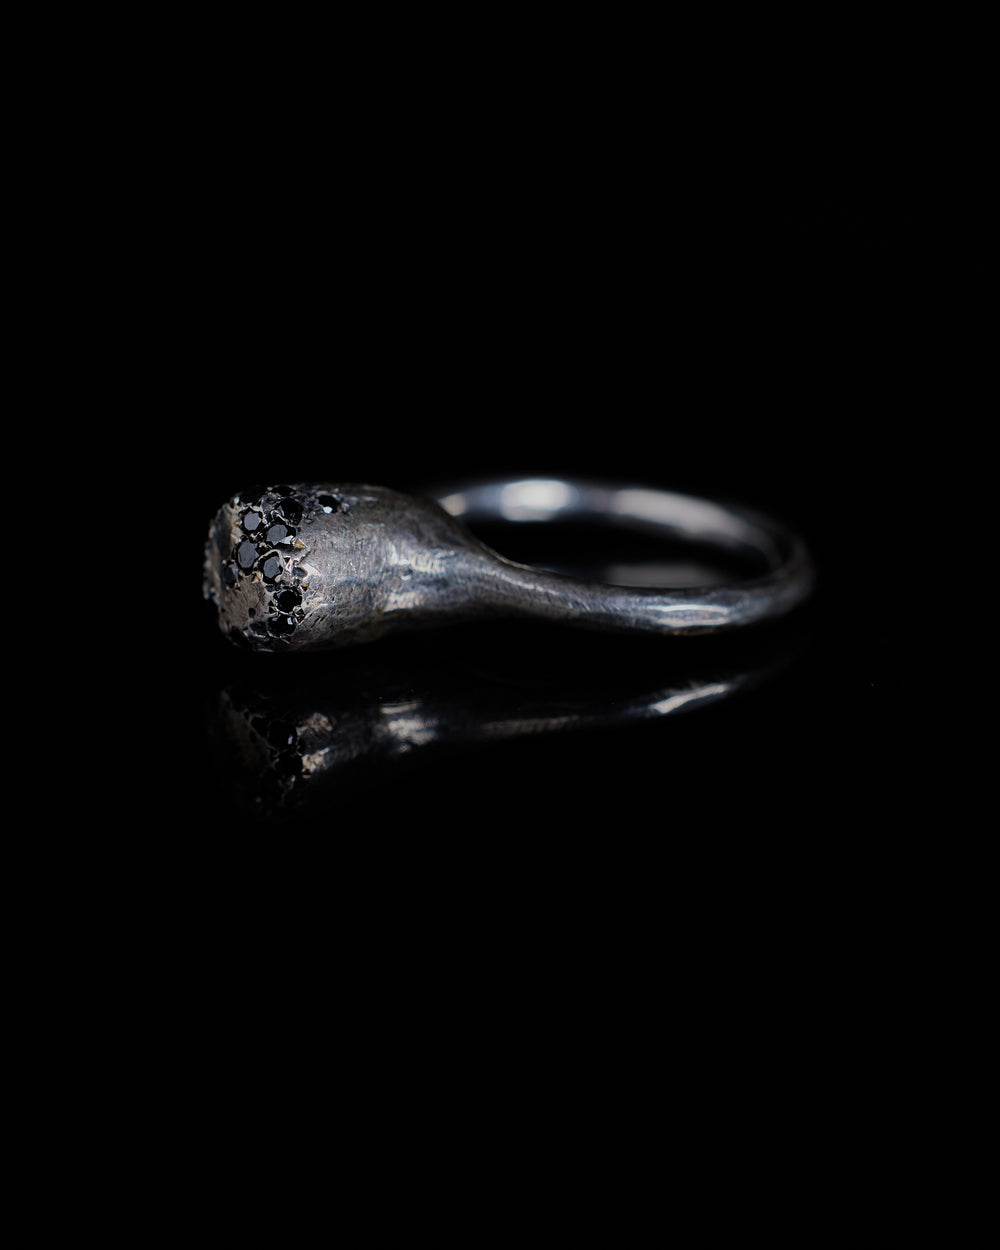 Cylo Ring Black